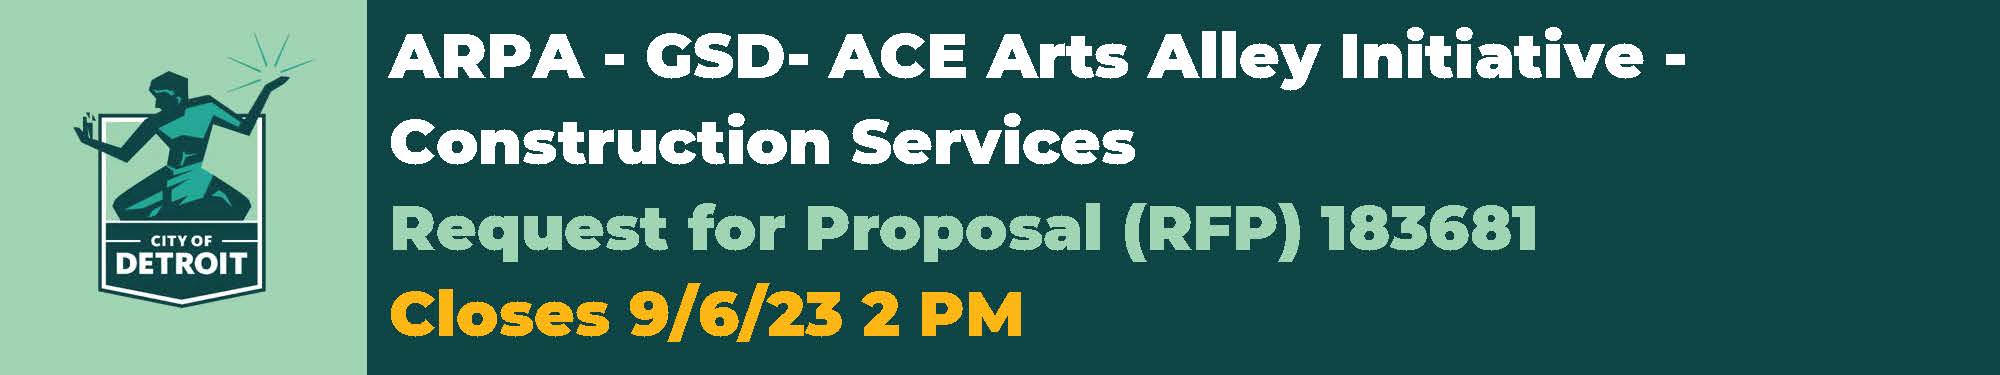 Take Part: ARPA - GSD - ACE Arts Alley Initiative - Construction Services